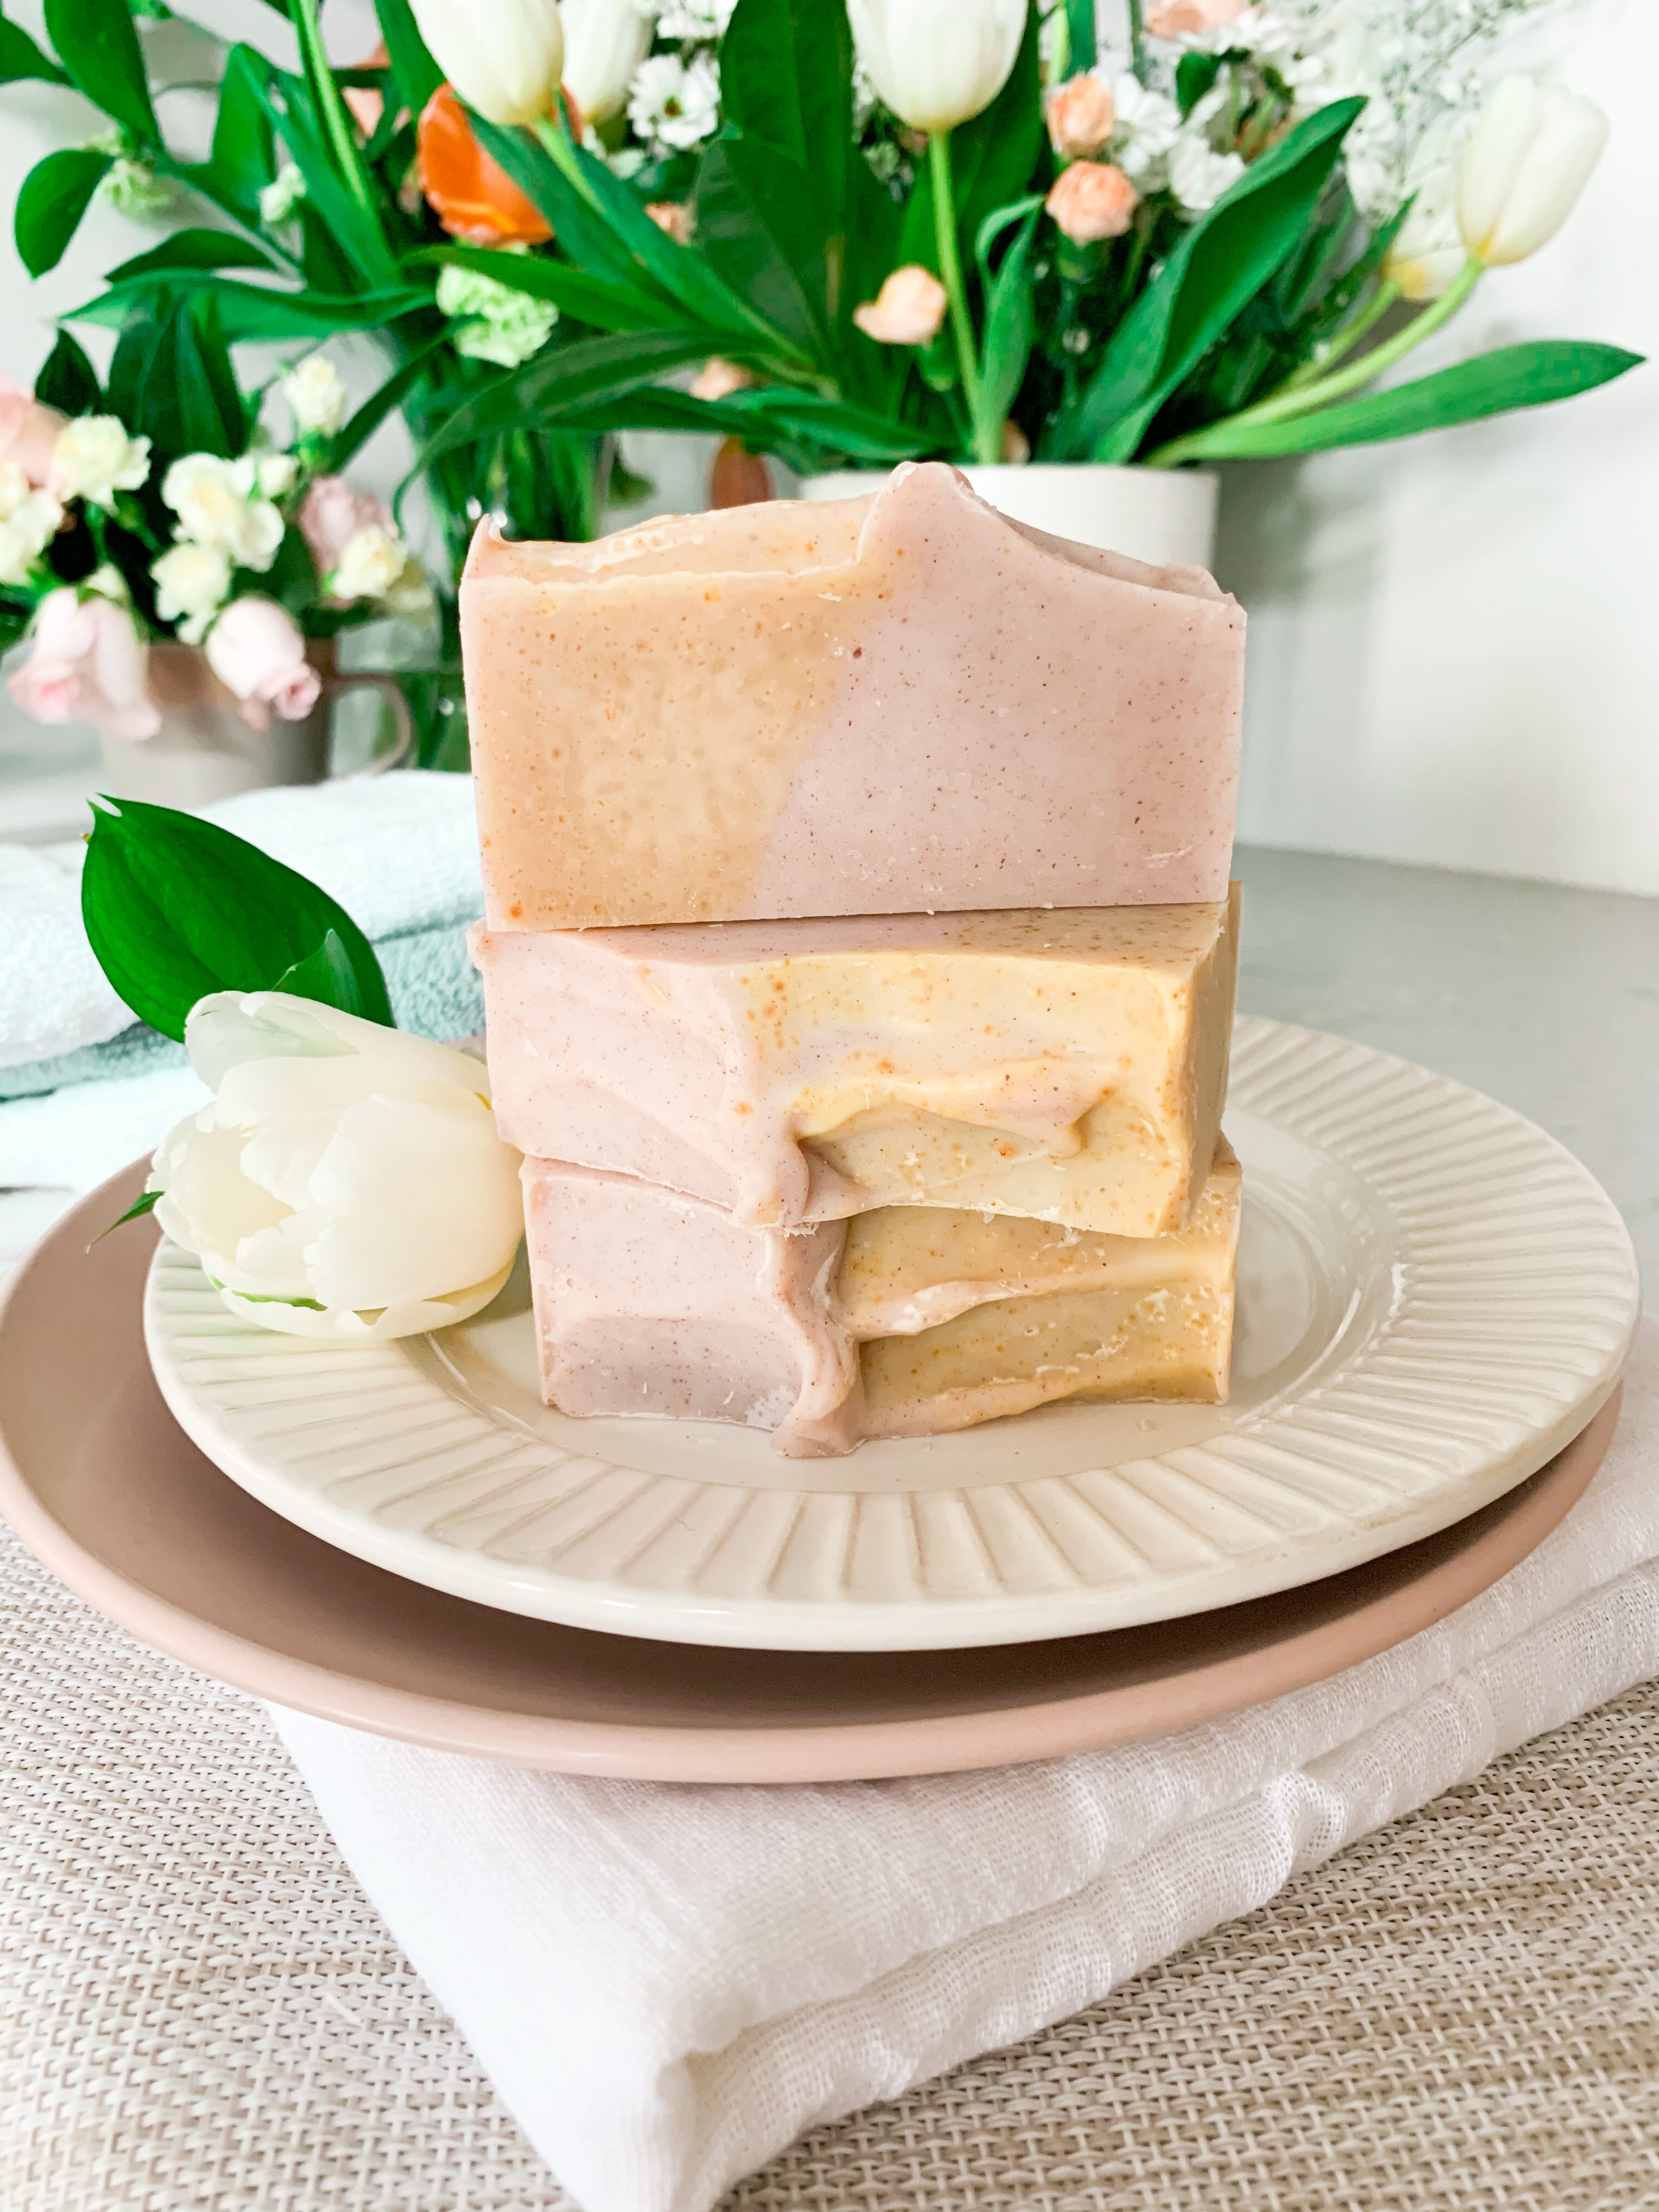 Be Bright - Sweet Orange & Geranium Soap Bar. Naturally scented with essential oils